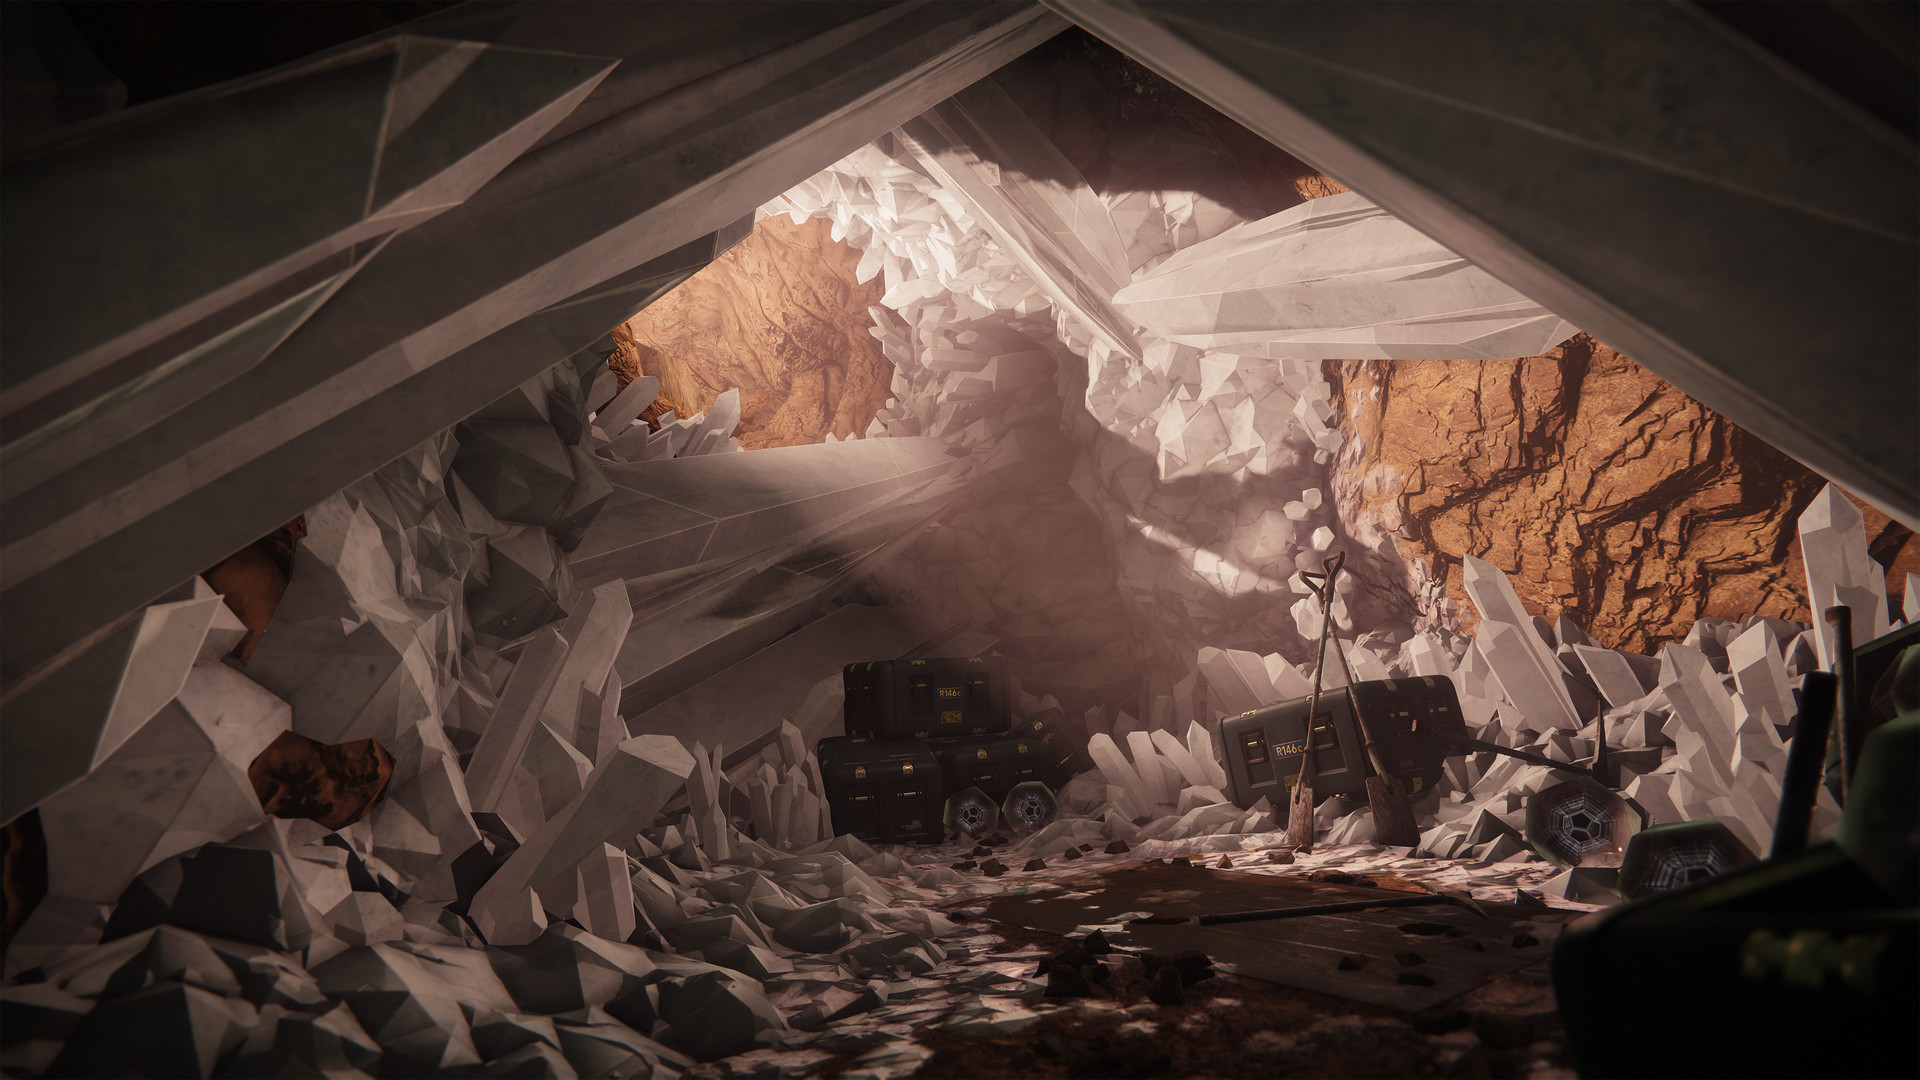 destiny 2's revived loot cave